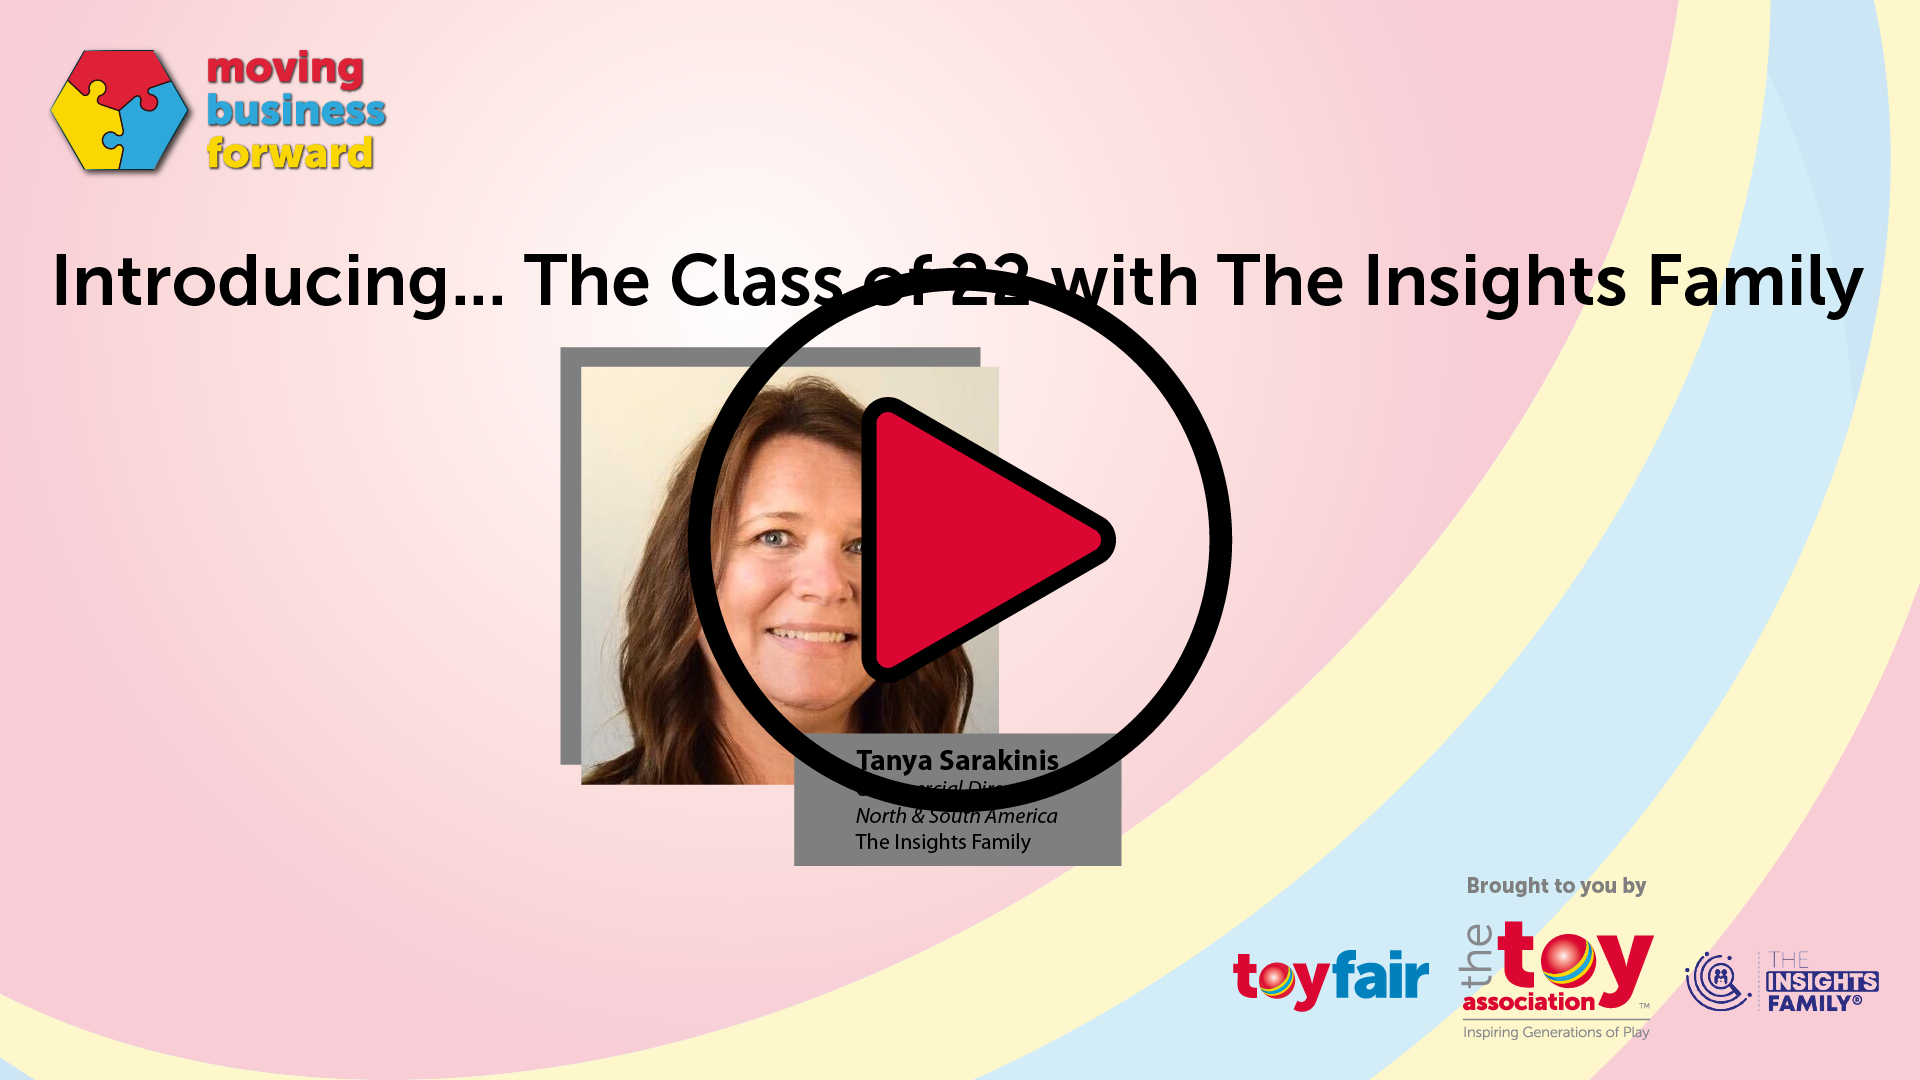 Introducing... The Class of 22 with The Insights Family